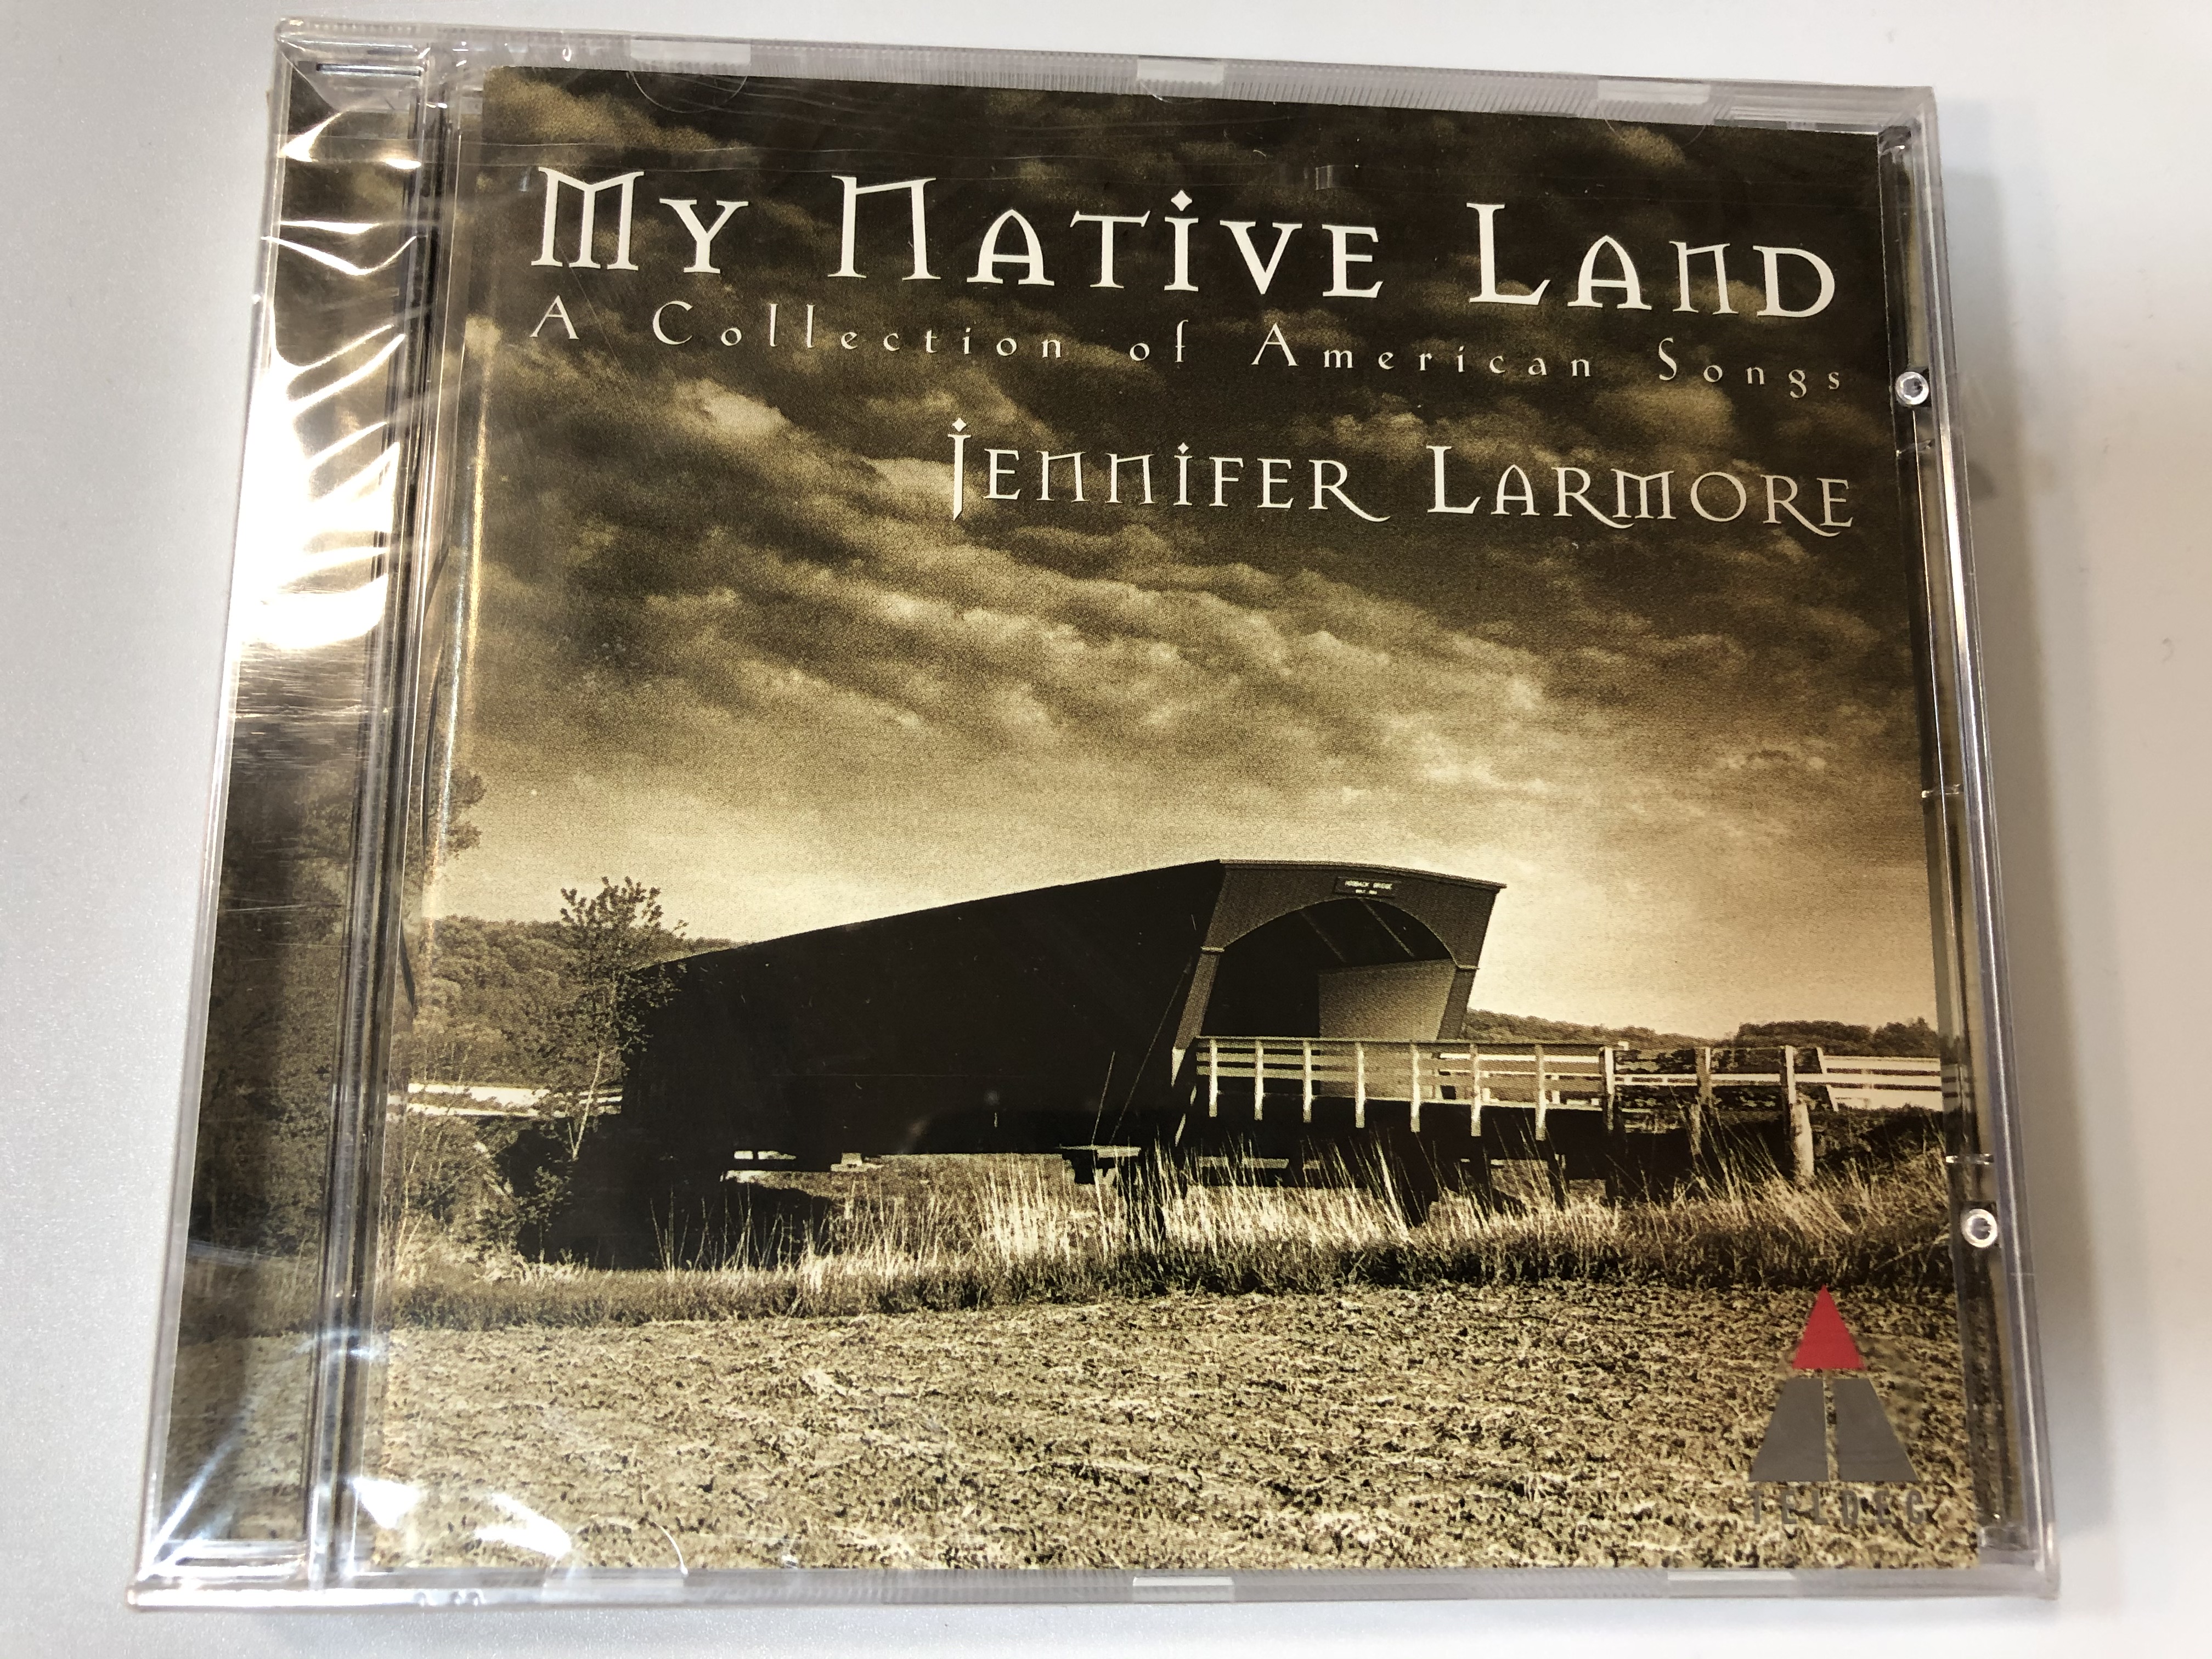 my-native-land-a-collection-of-american-songs-jennifer-larmore-teldec-audio-cd-1997-0630-16069-2-1-.jpg